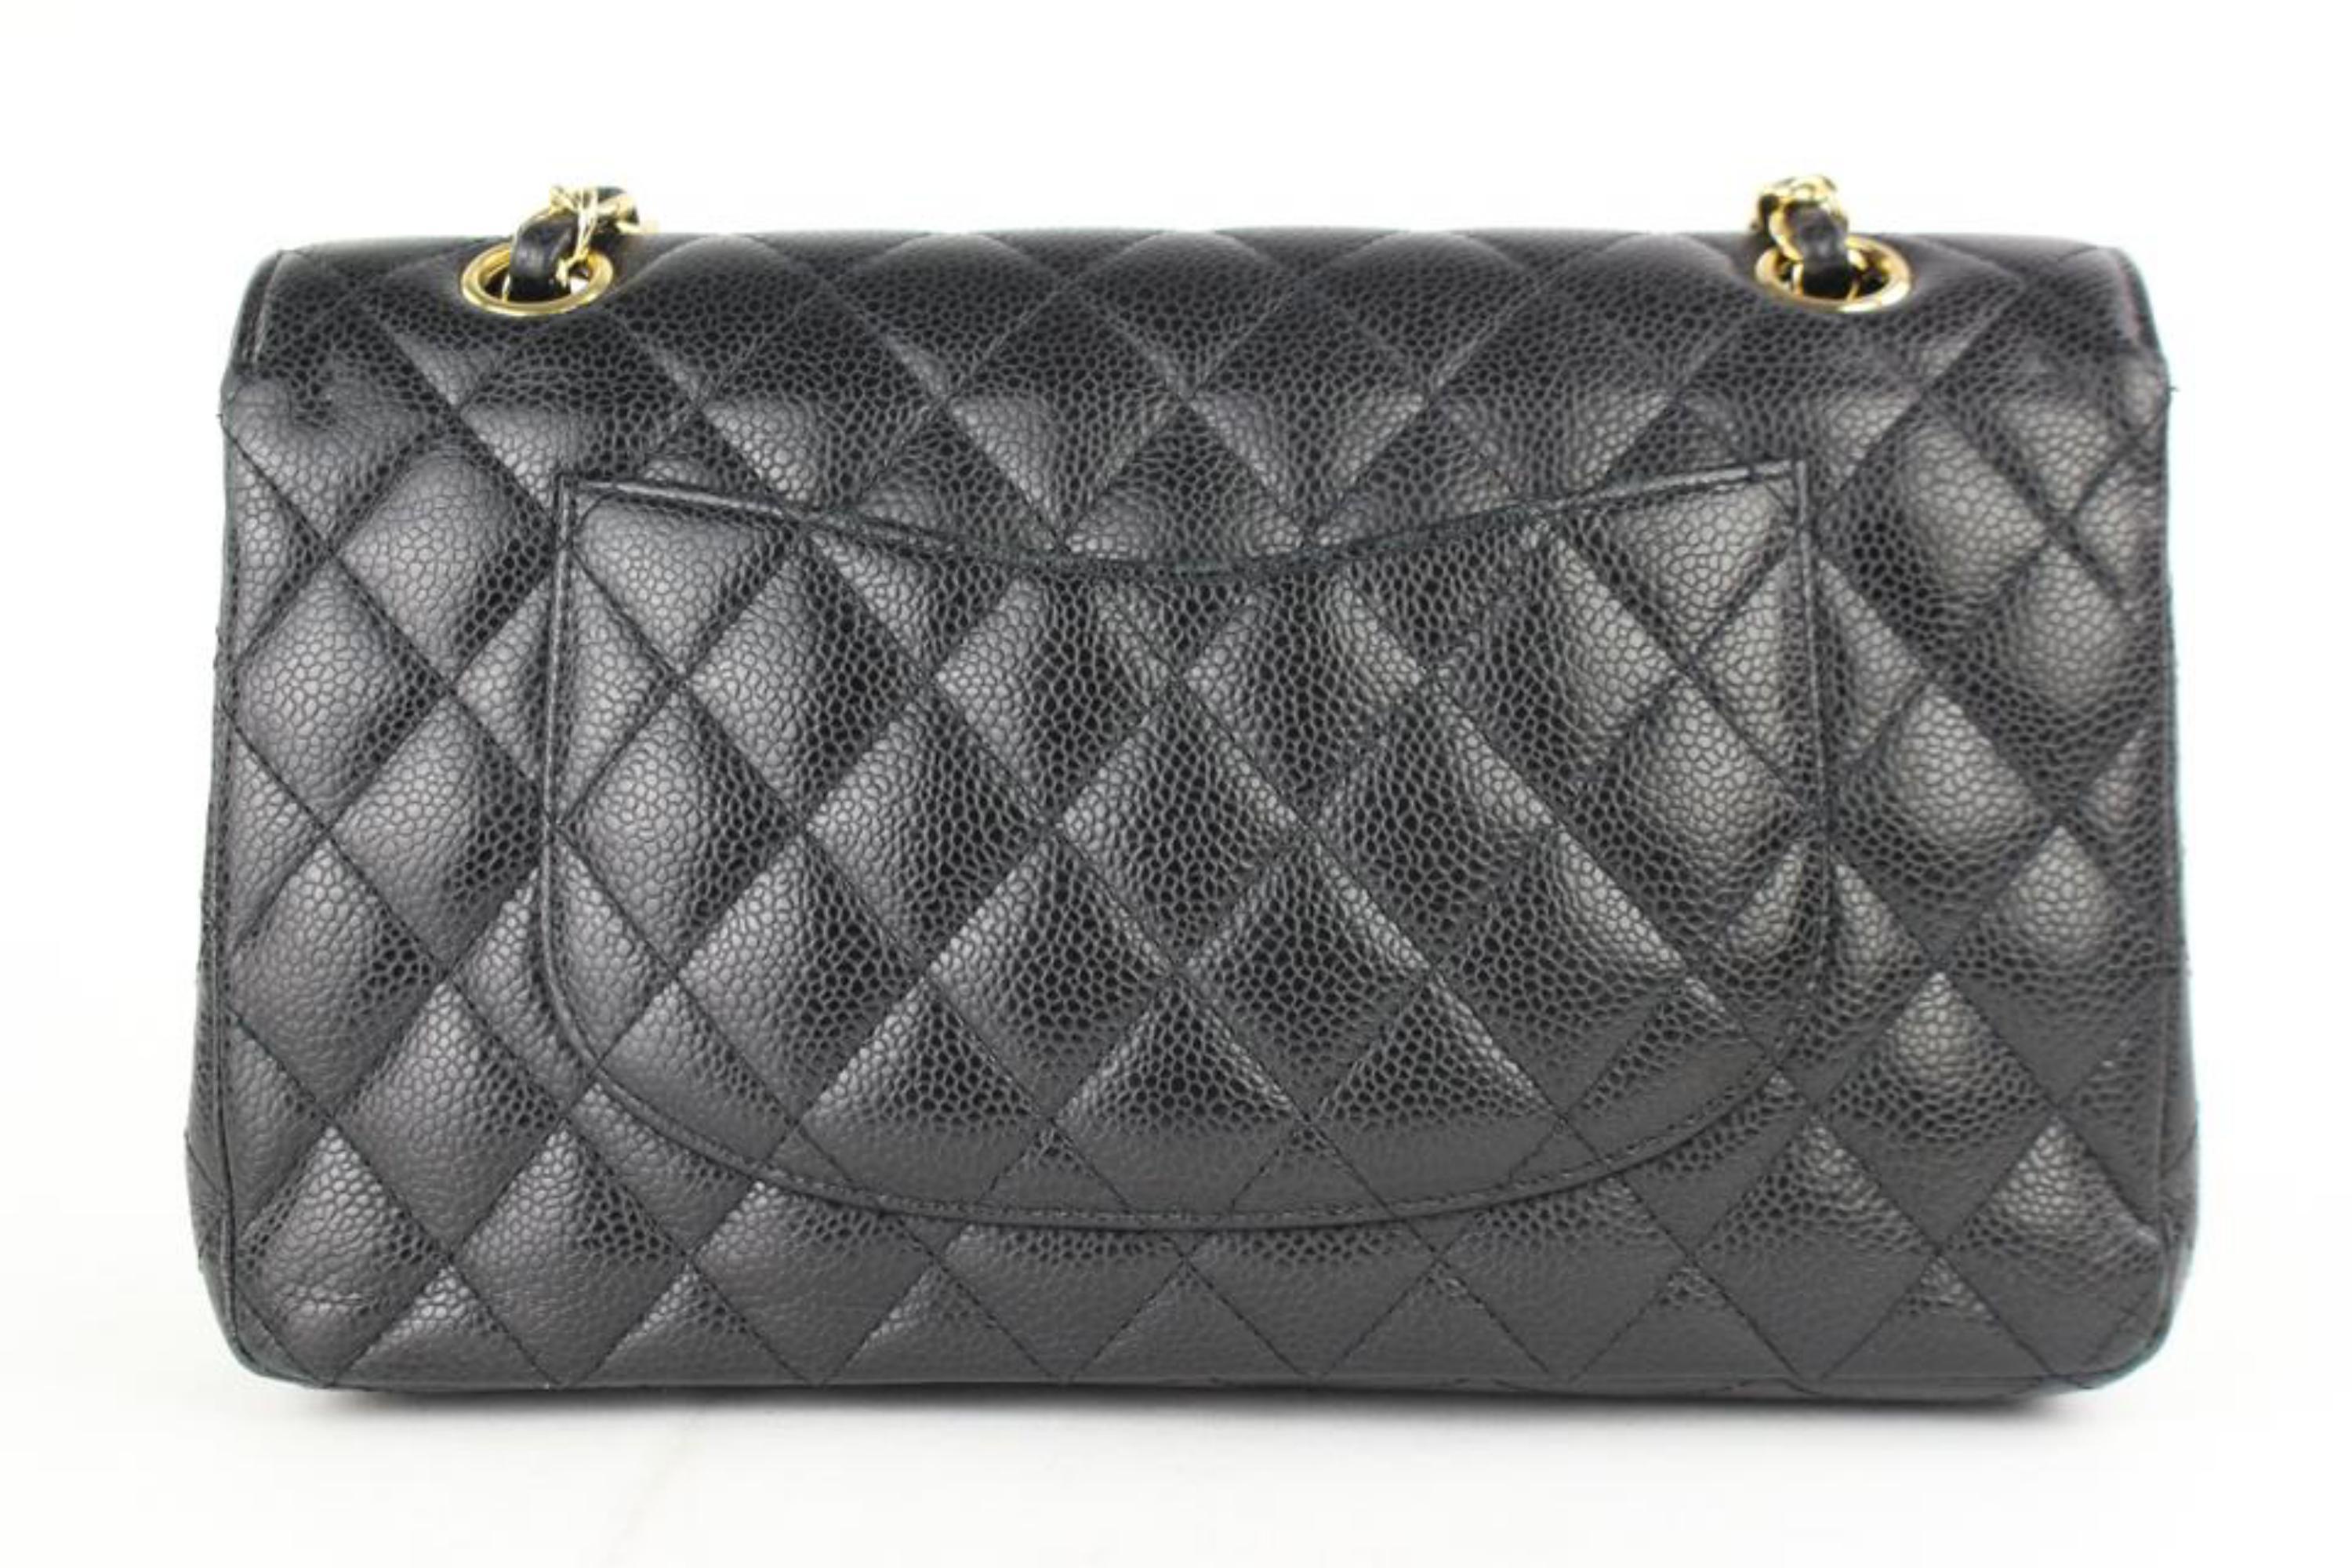 Chanel Quilted Medium Classic Double Flap 6cj0115 Black Leather Shoulder Bag For Sale 6